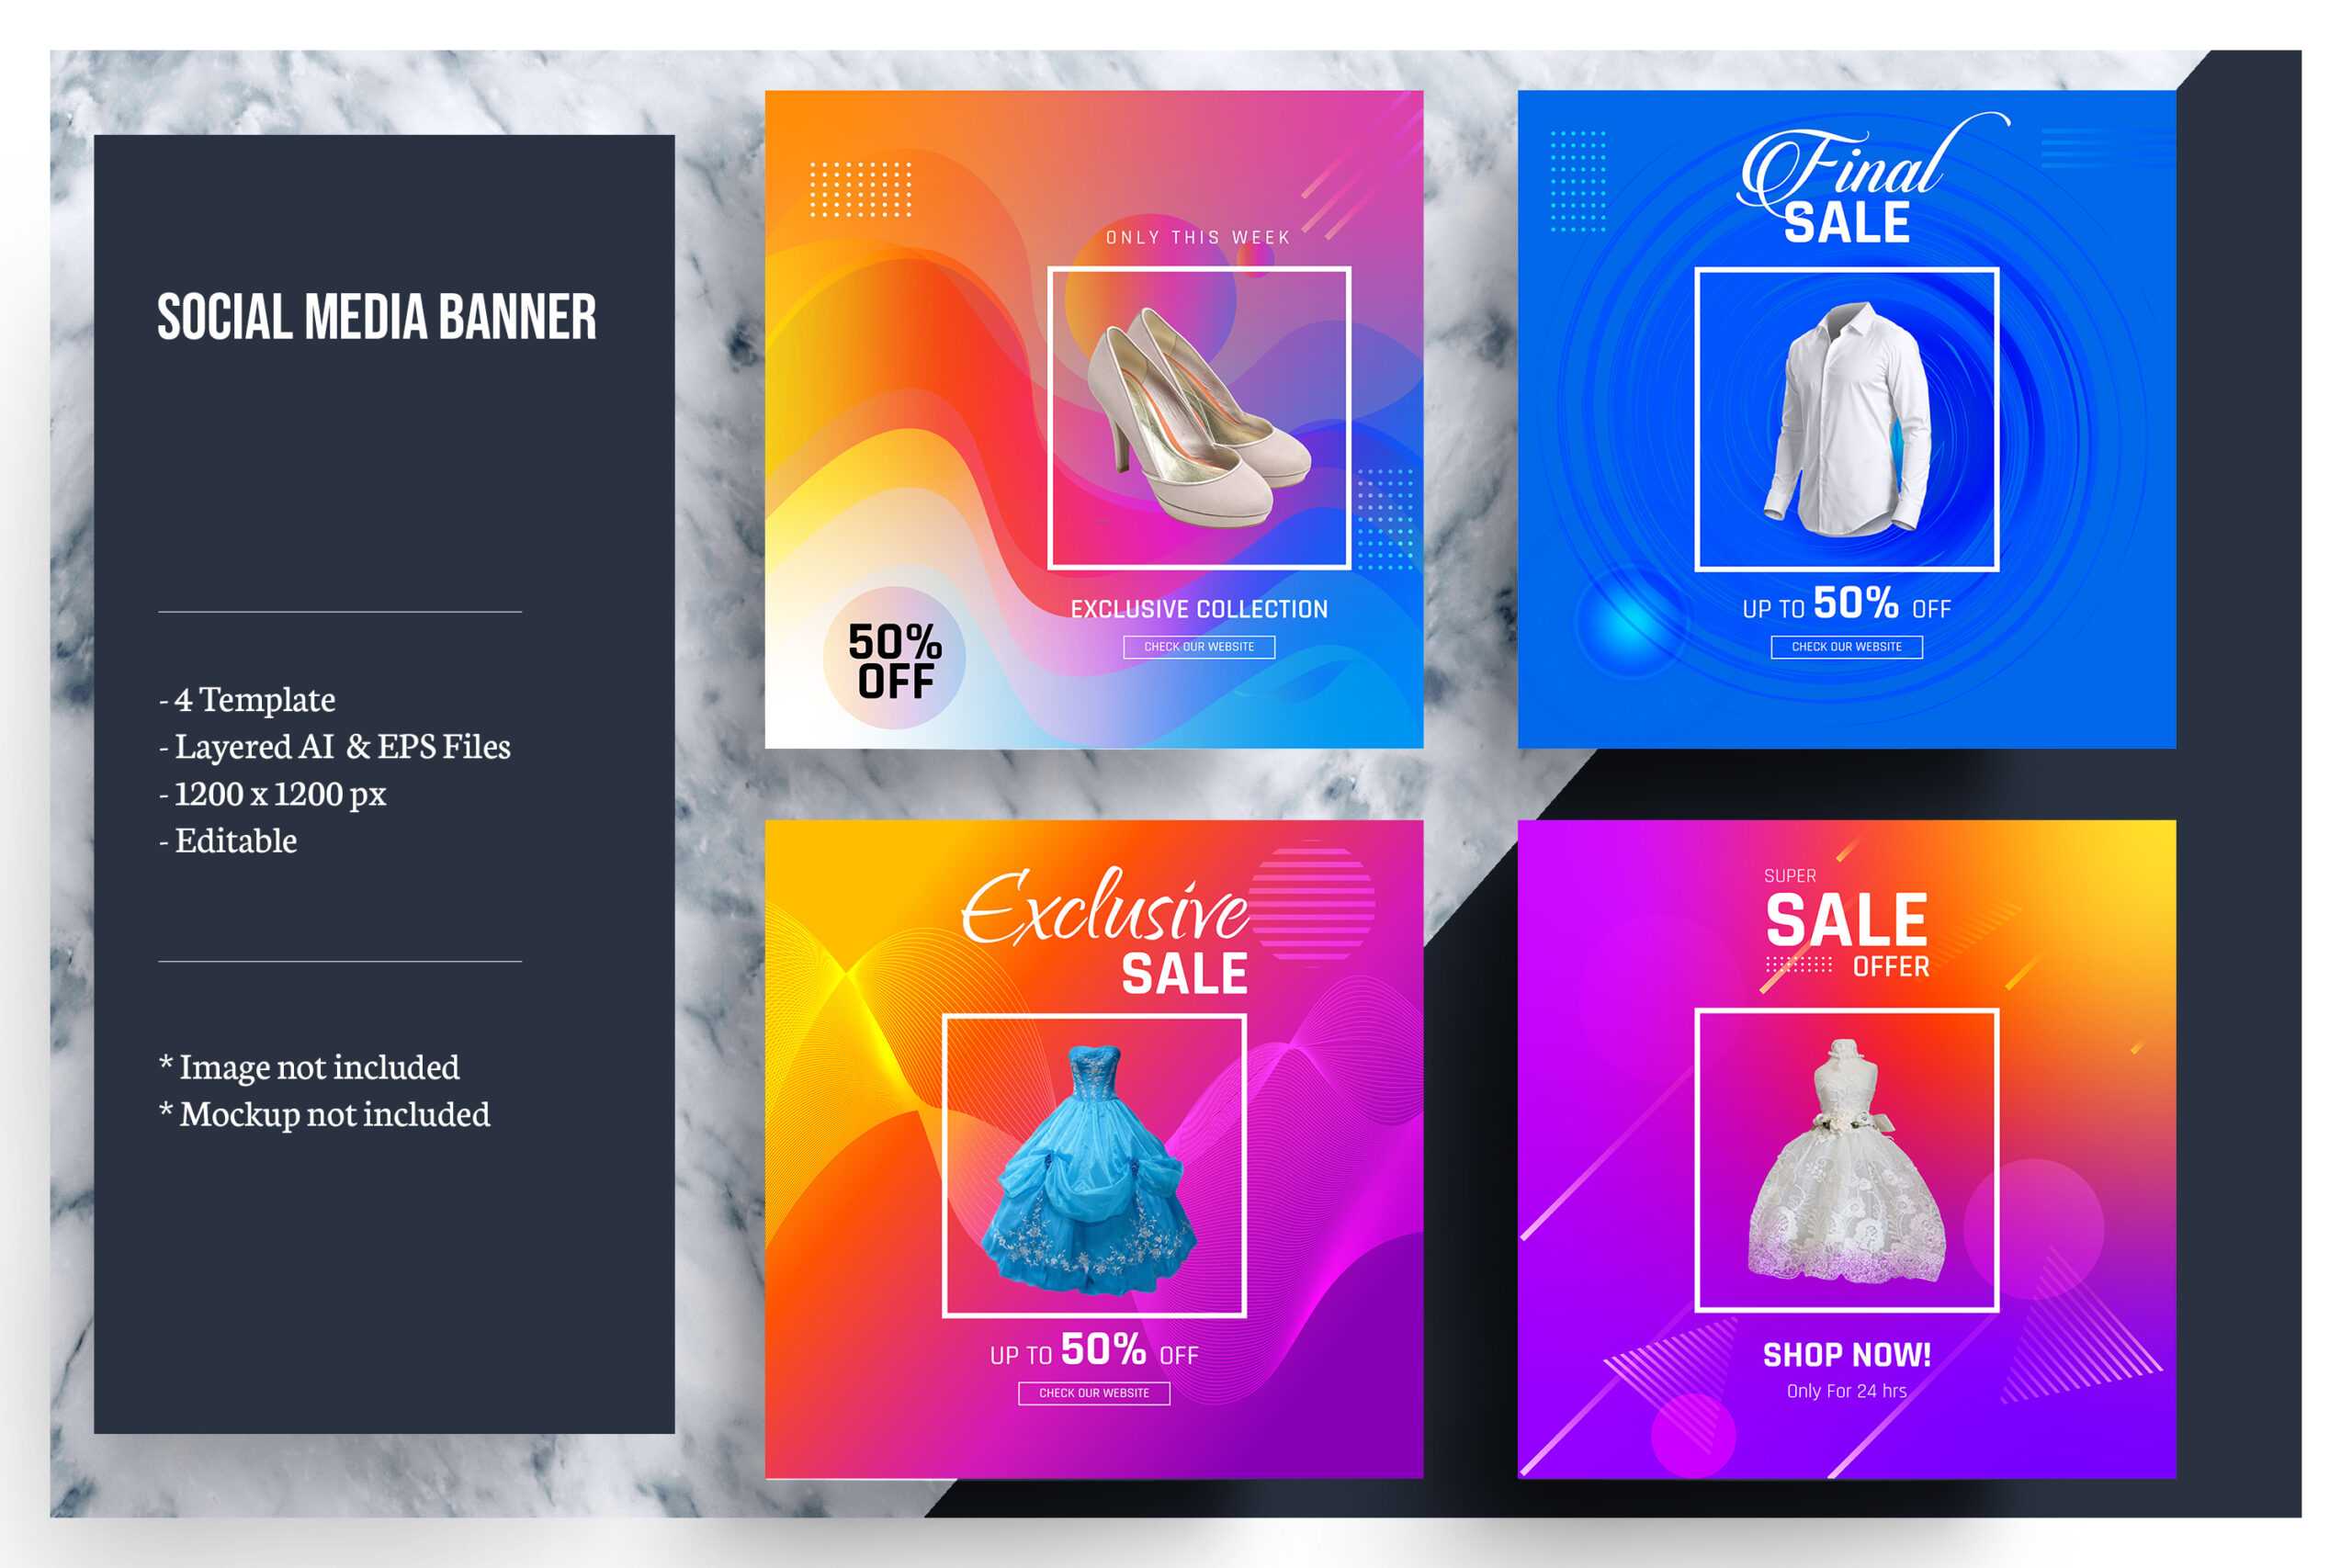 Colorful Social Media Banner Template Inside Product Banner Template